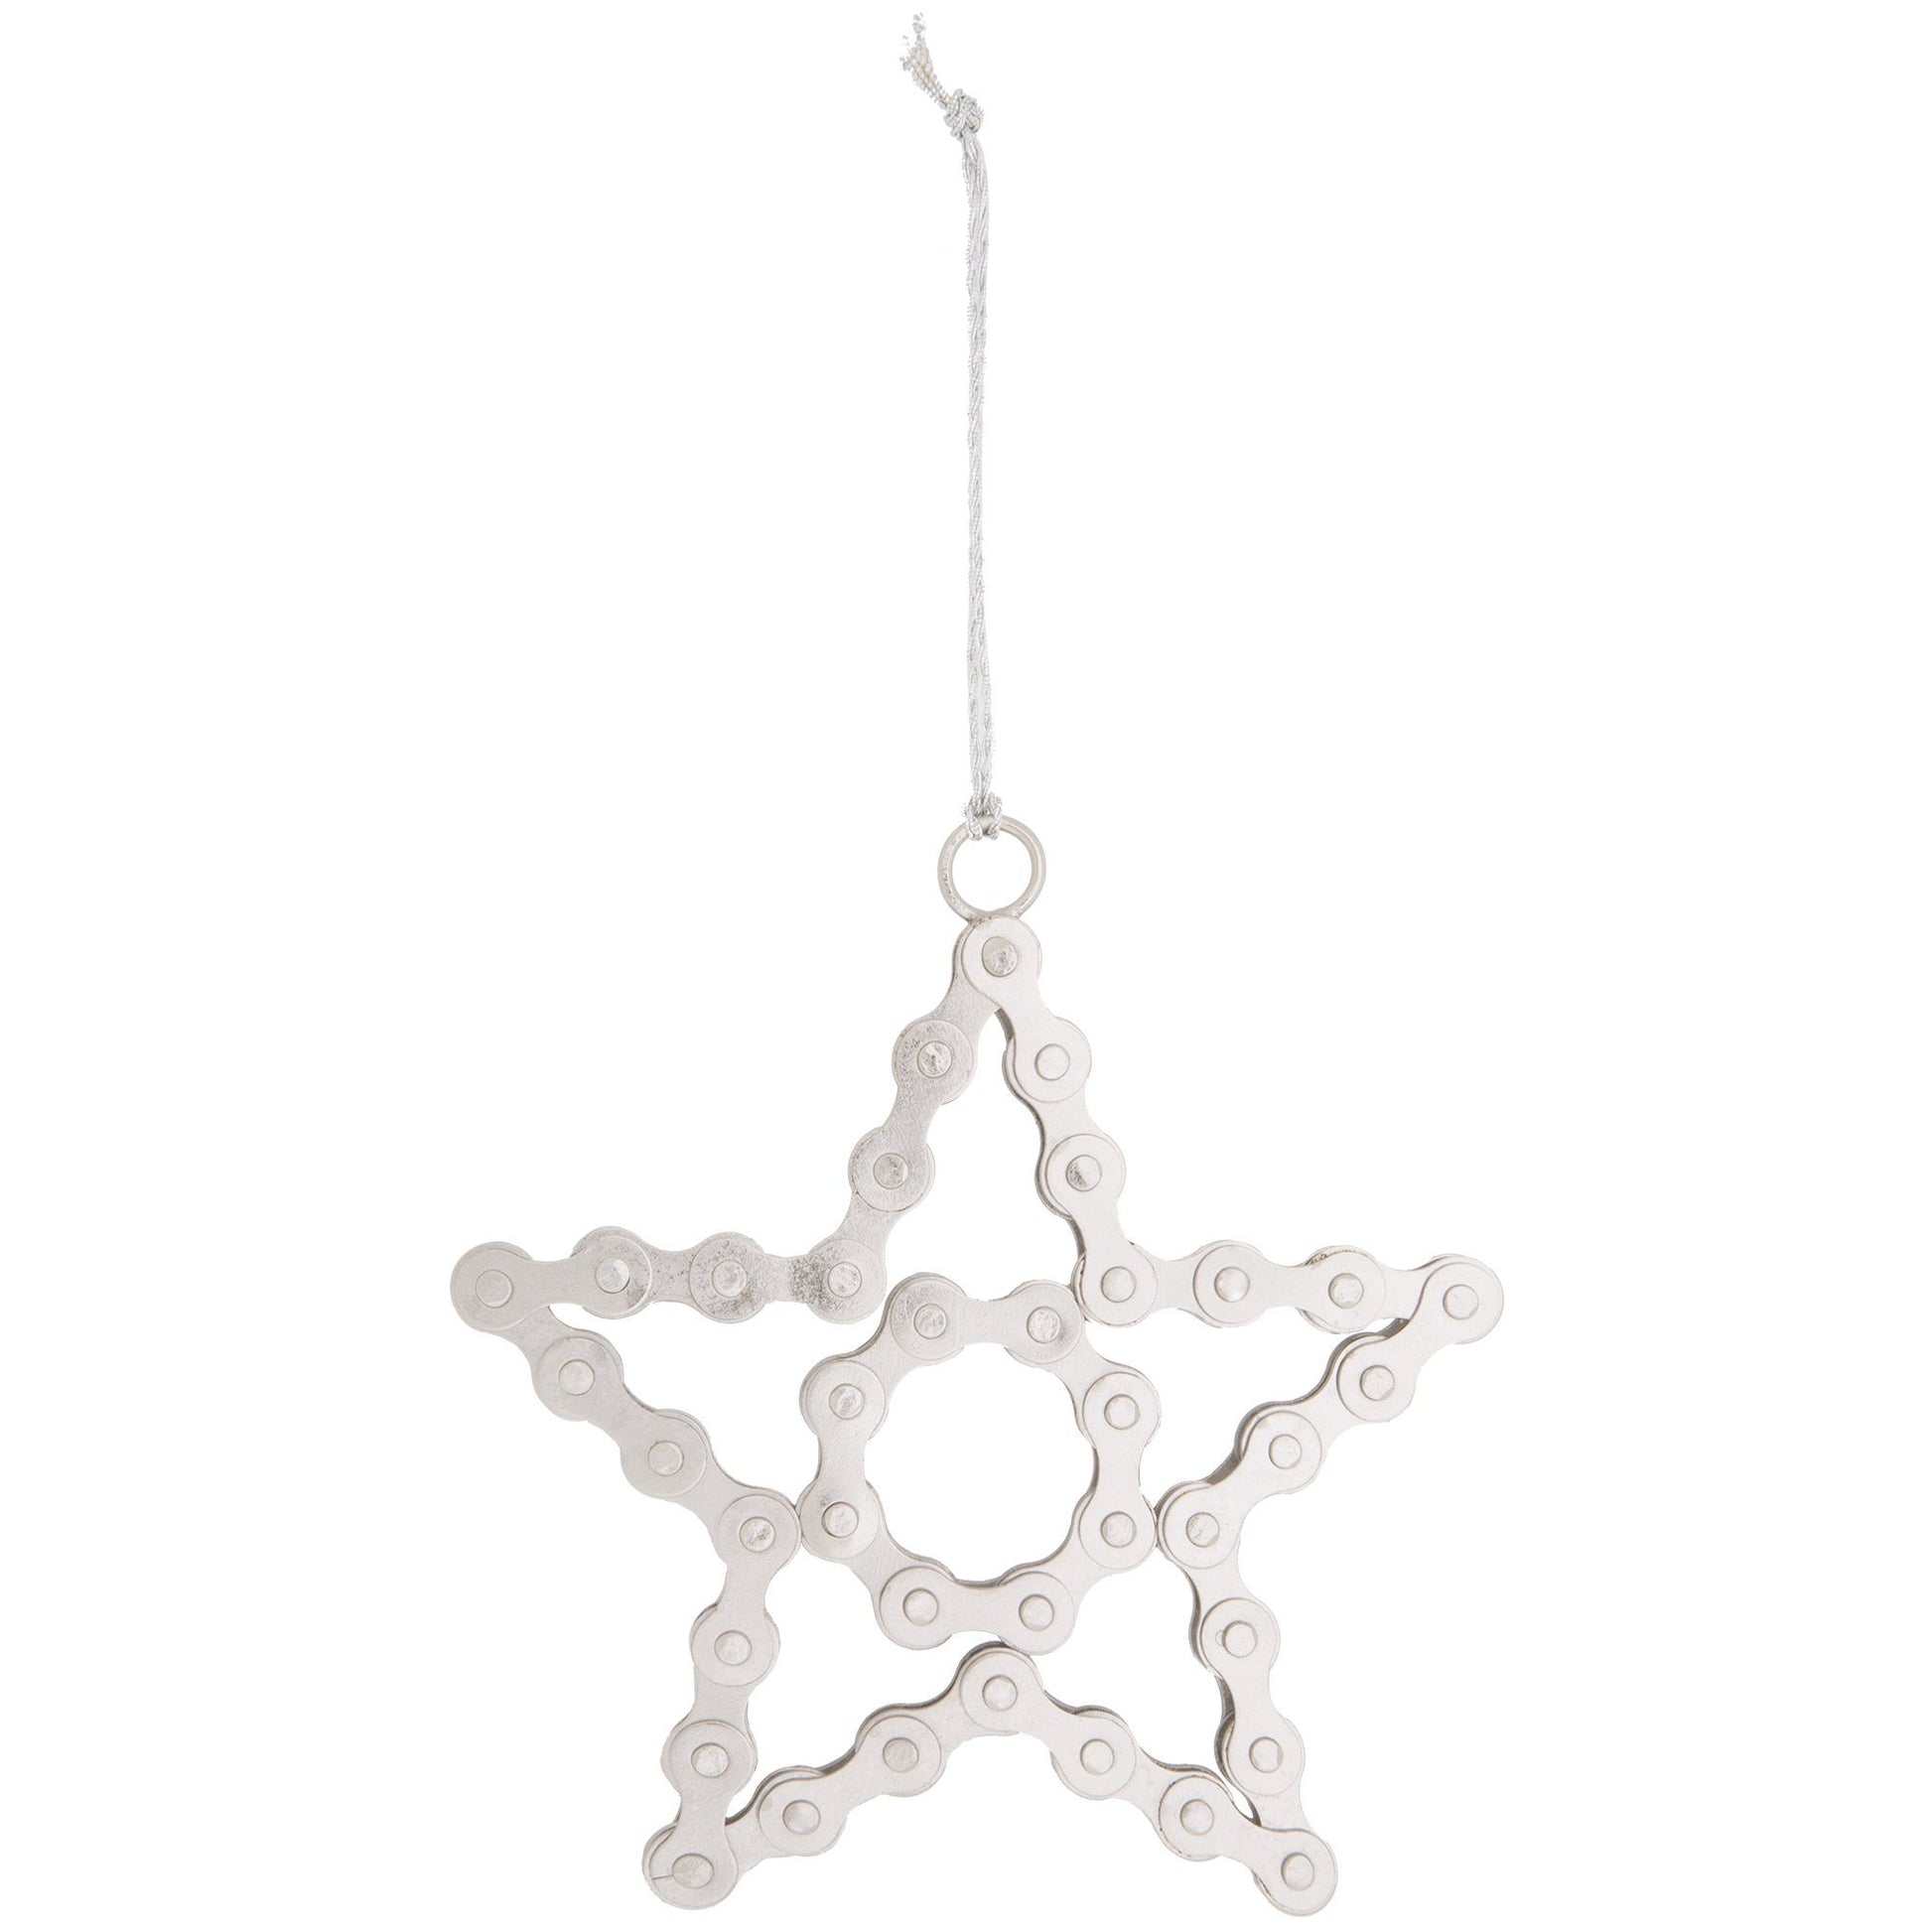 Recycled Bicycle Chain Star Ornament